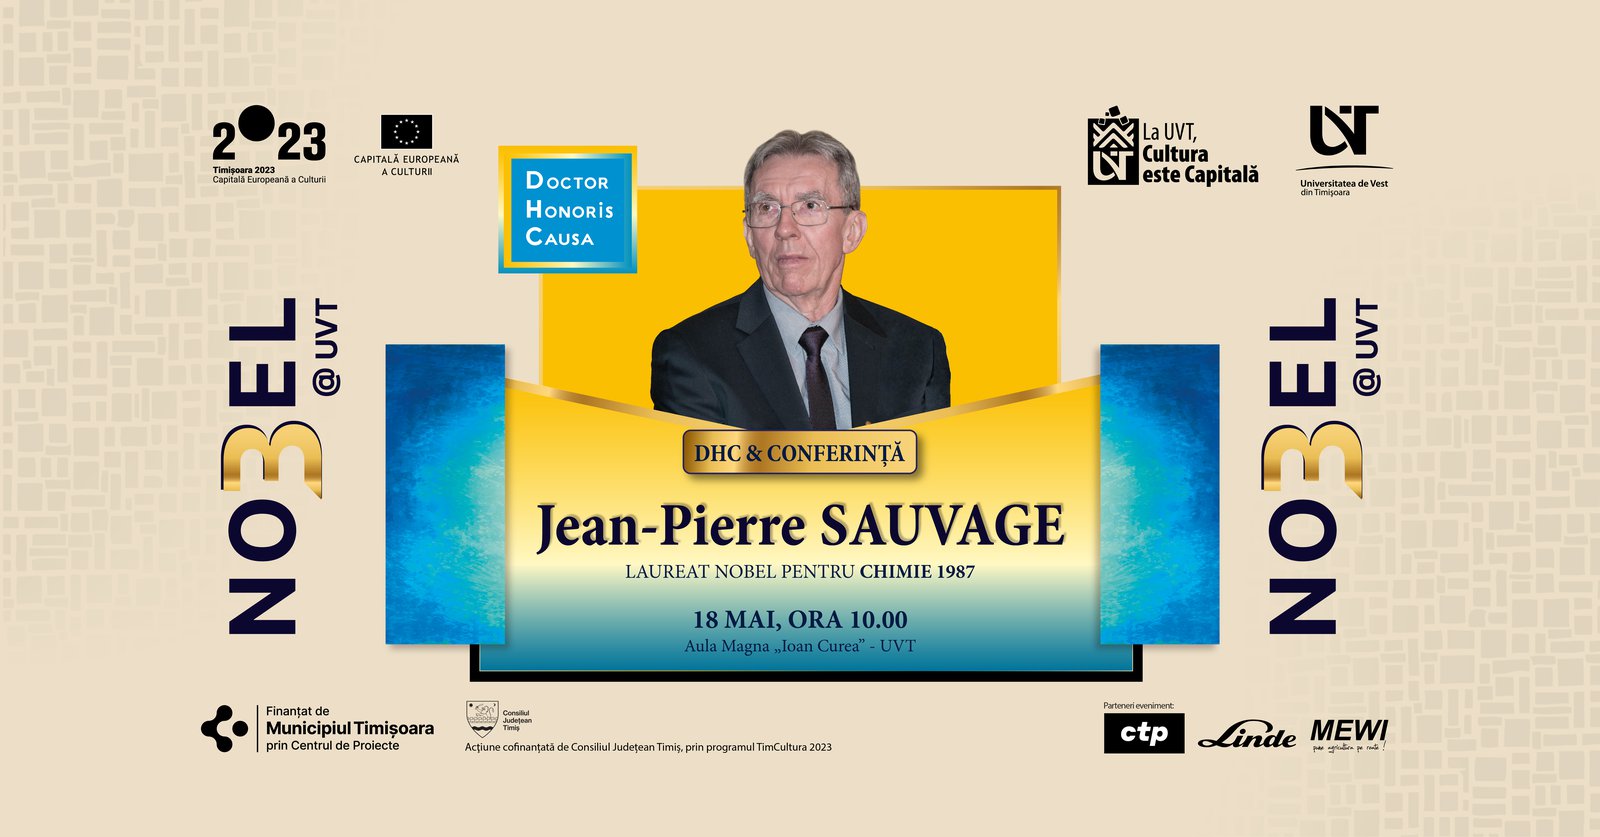 Ideas that change the world - Jean-Pierre Sauvage, May 18, 2023